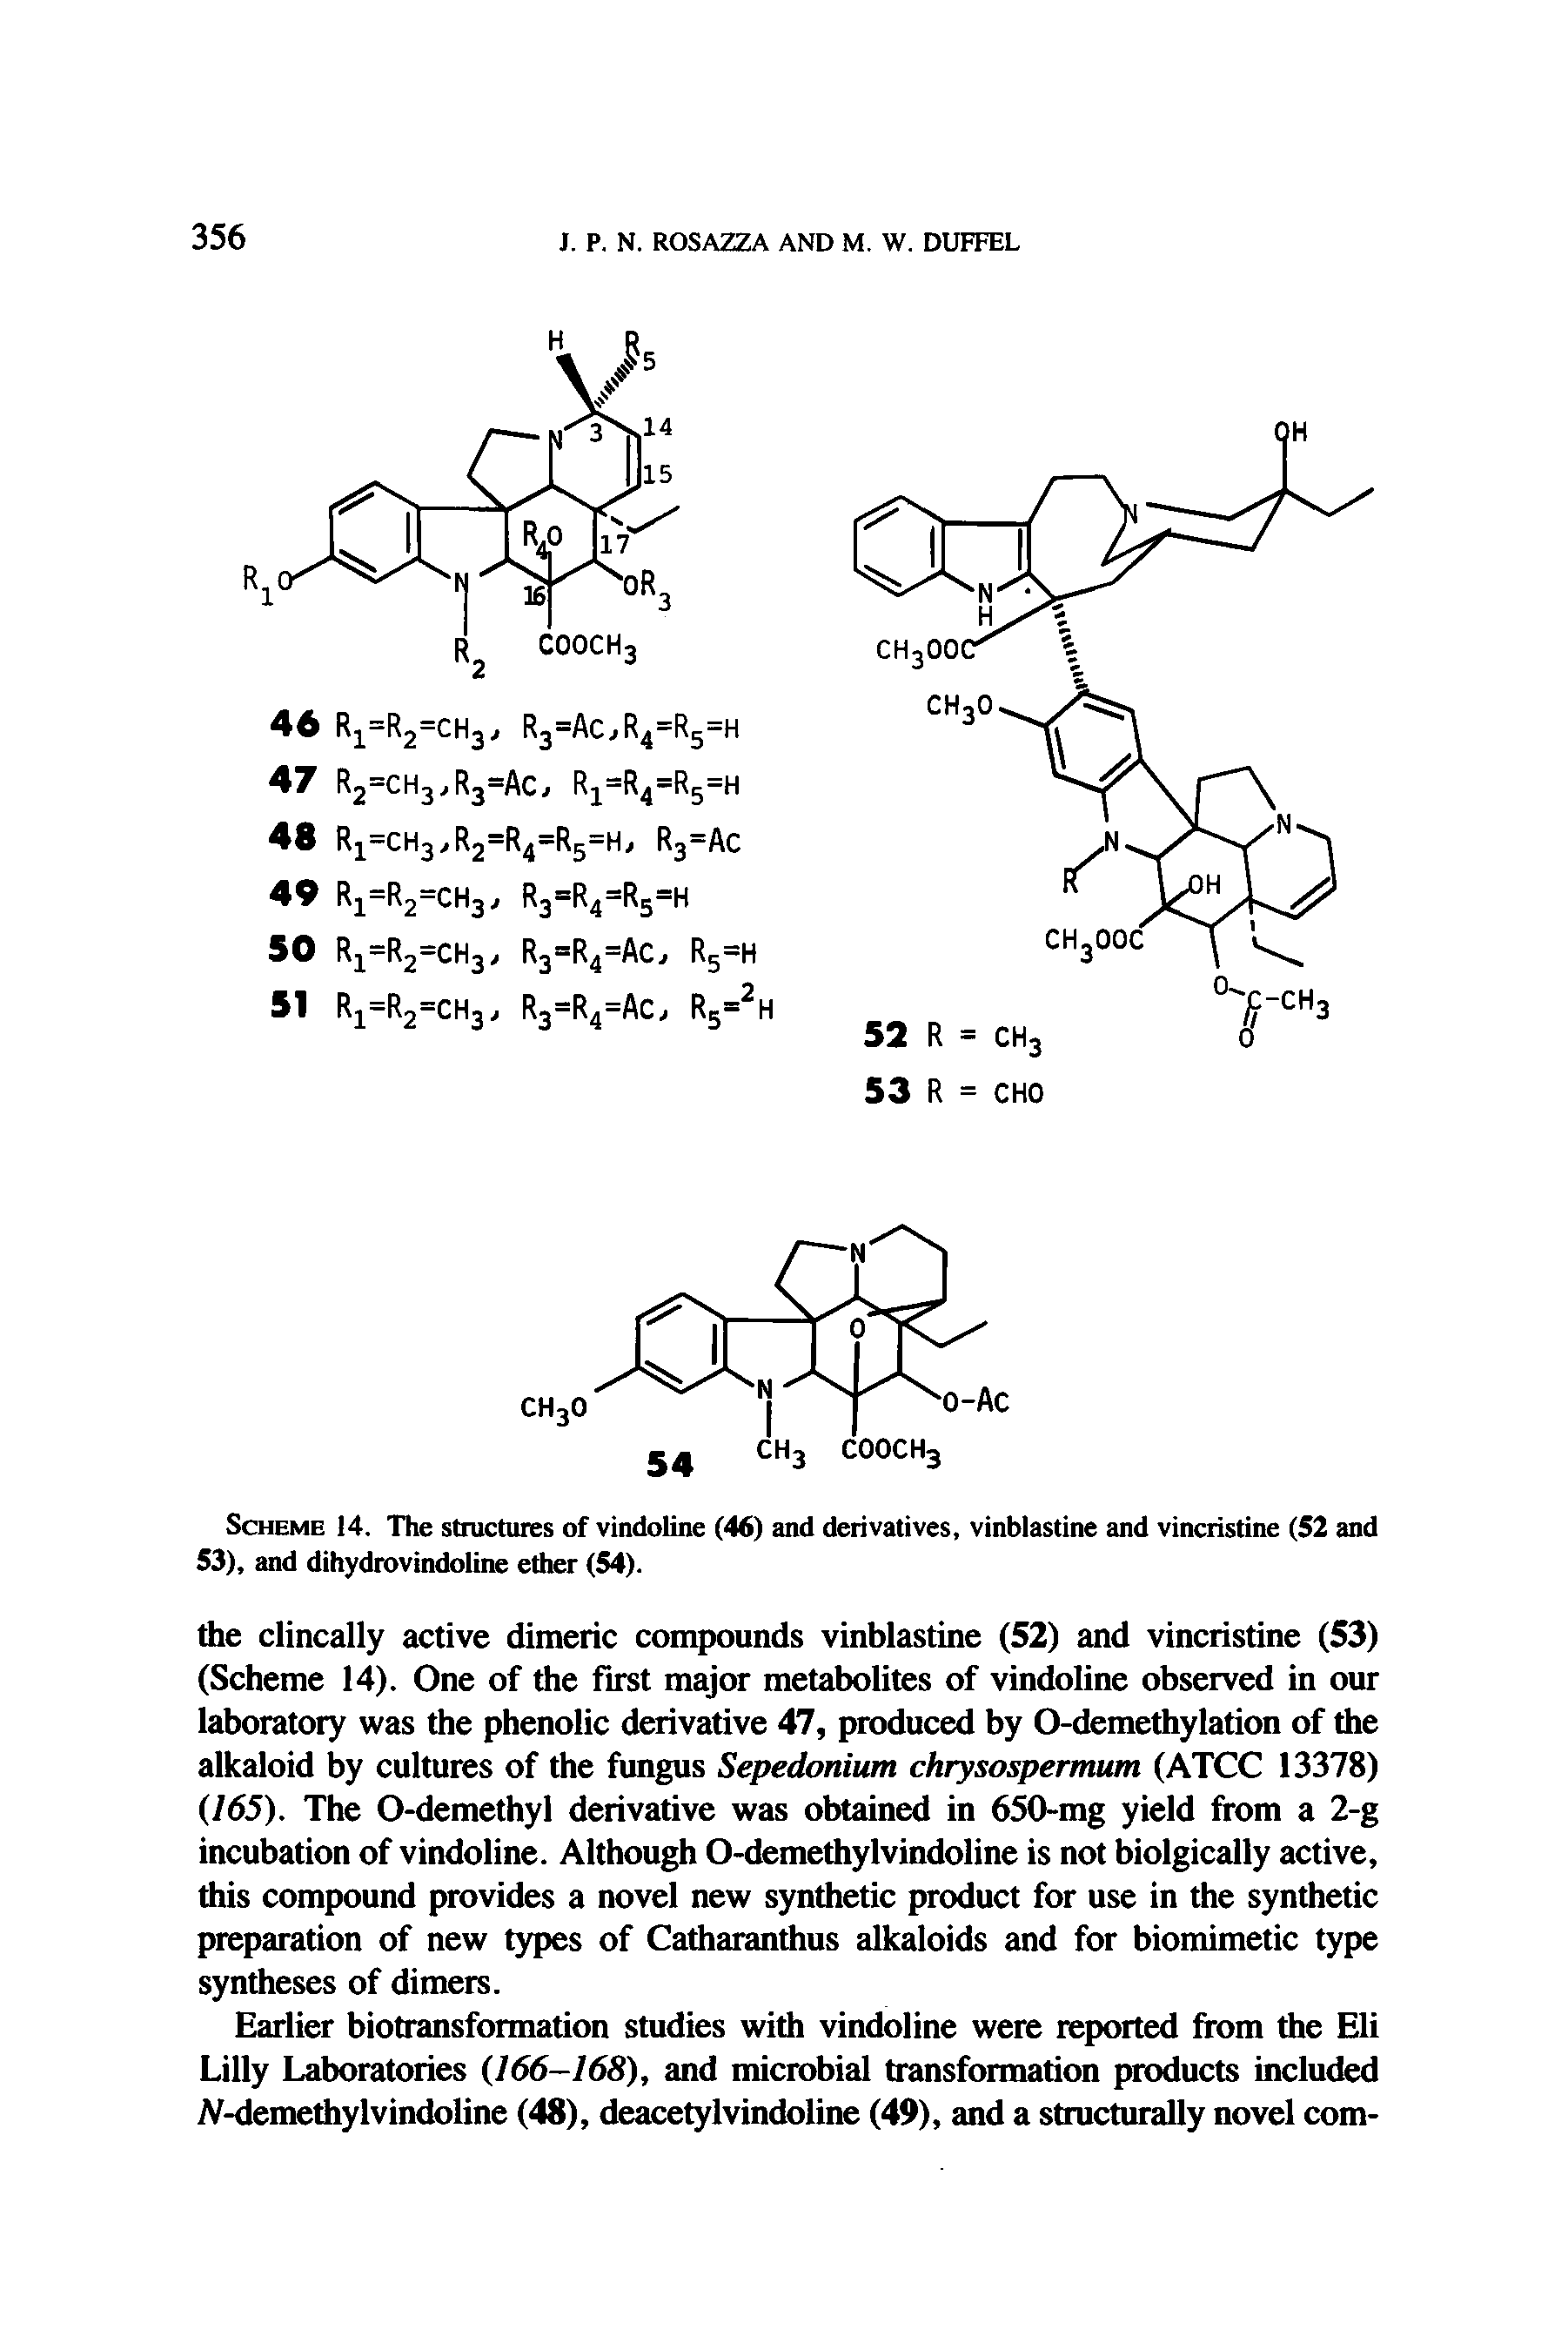 Scheme 14. The structures of vindoline (46) and derivatives, vinblastine and vincristine (52 and 53), and dihydrovindoline ether (54).